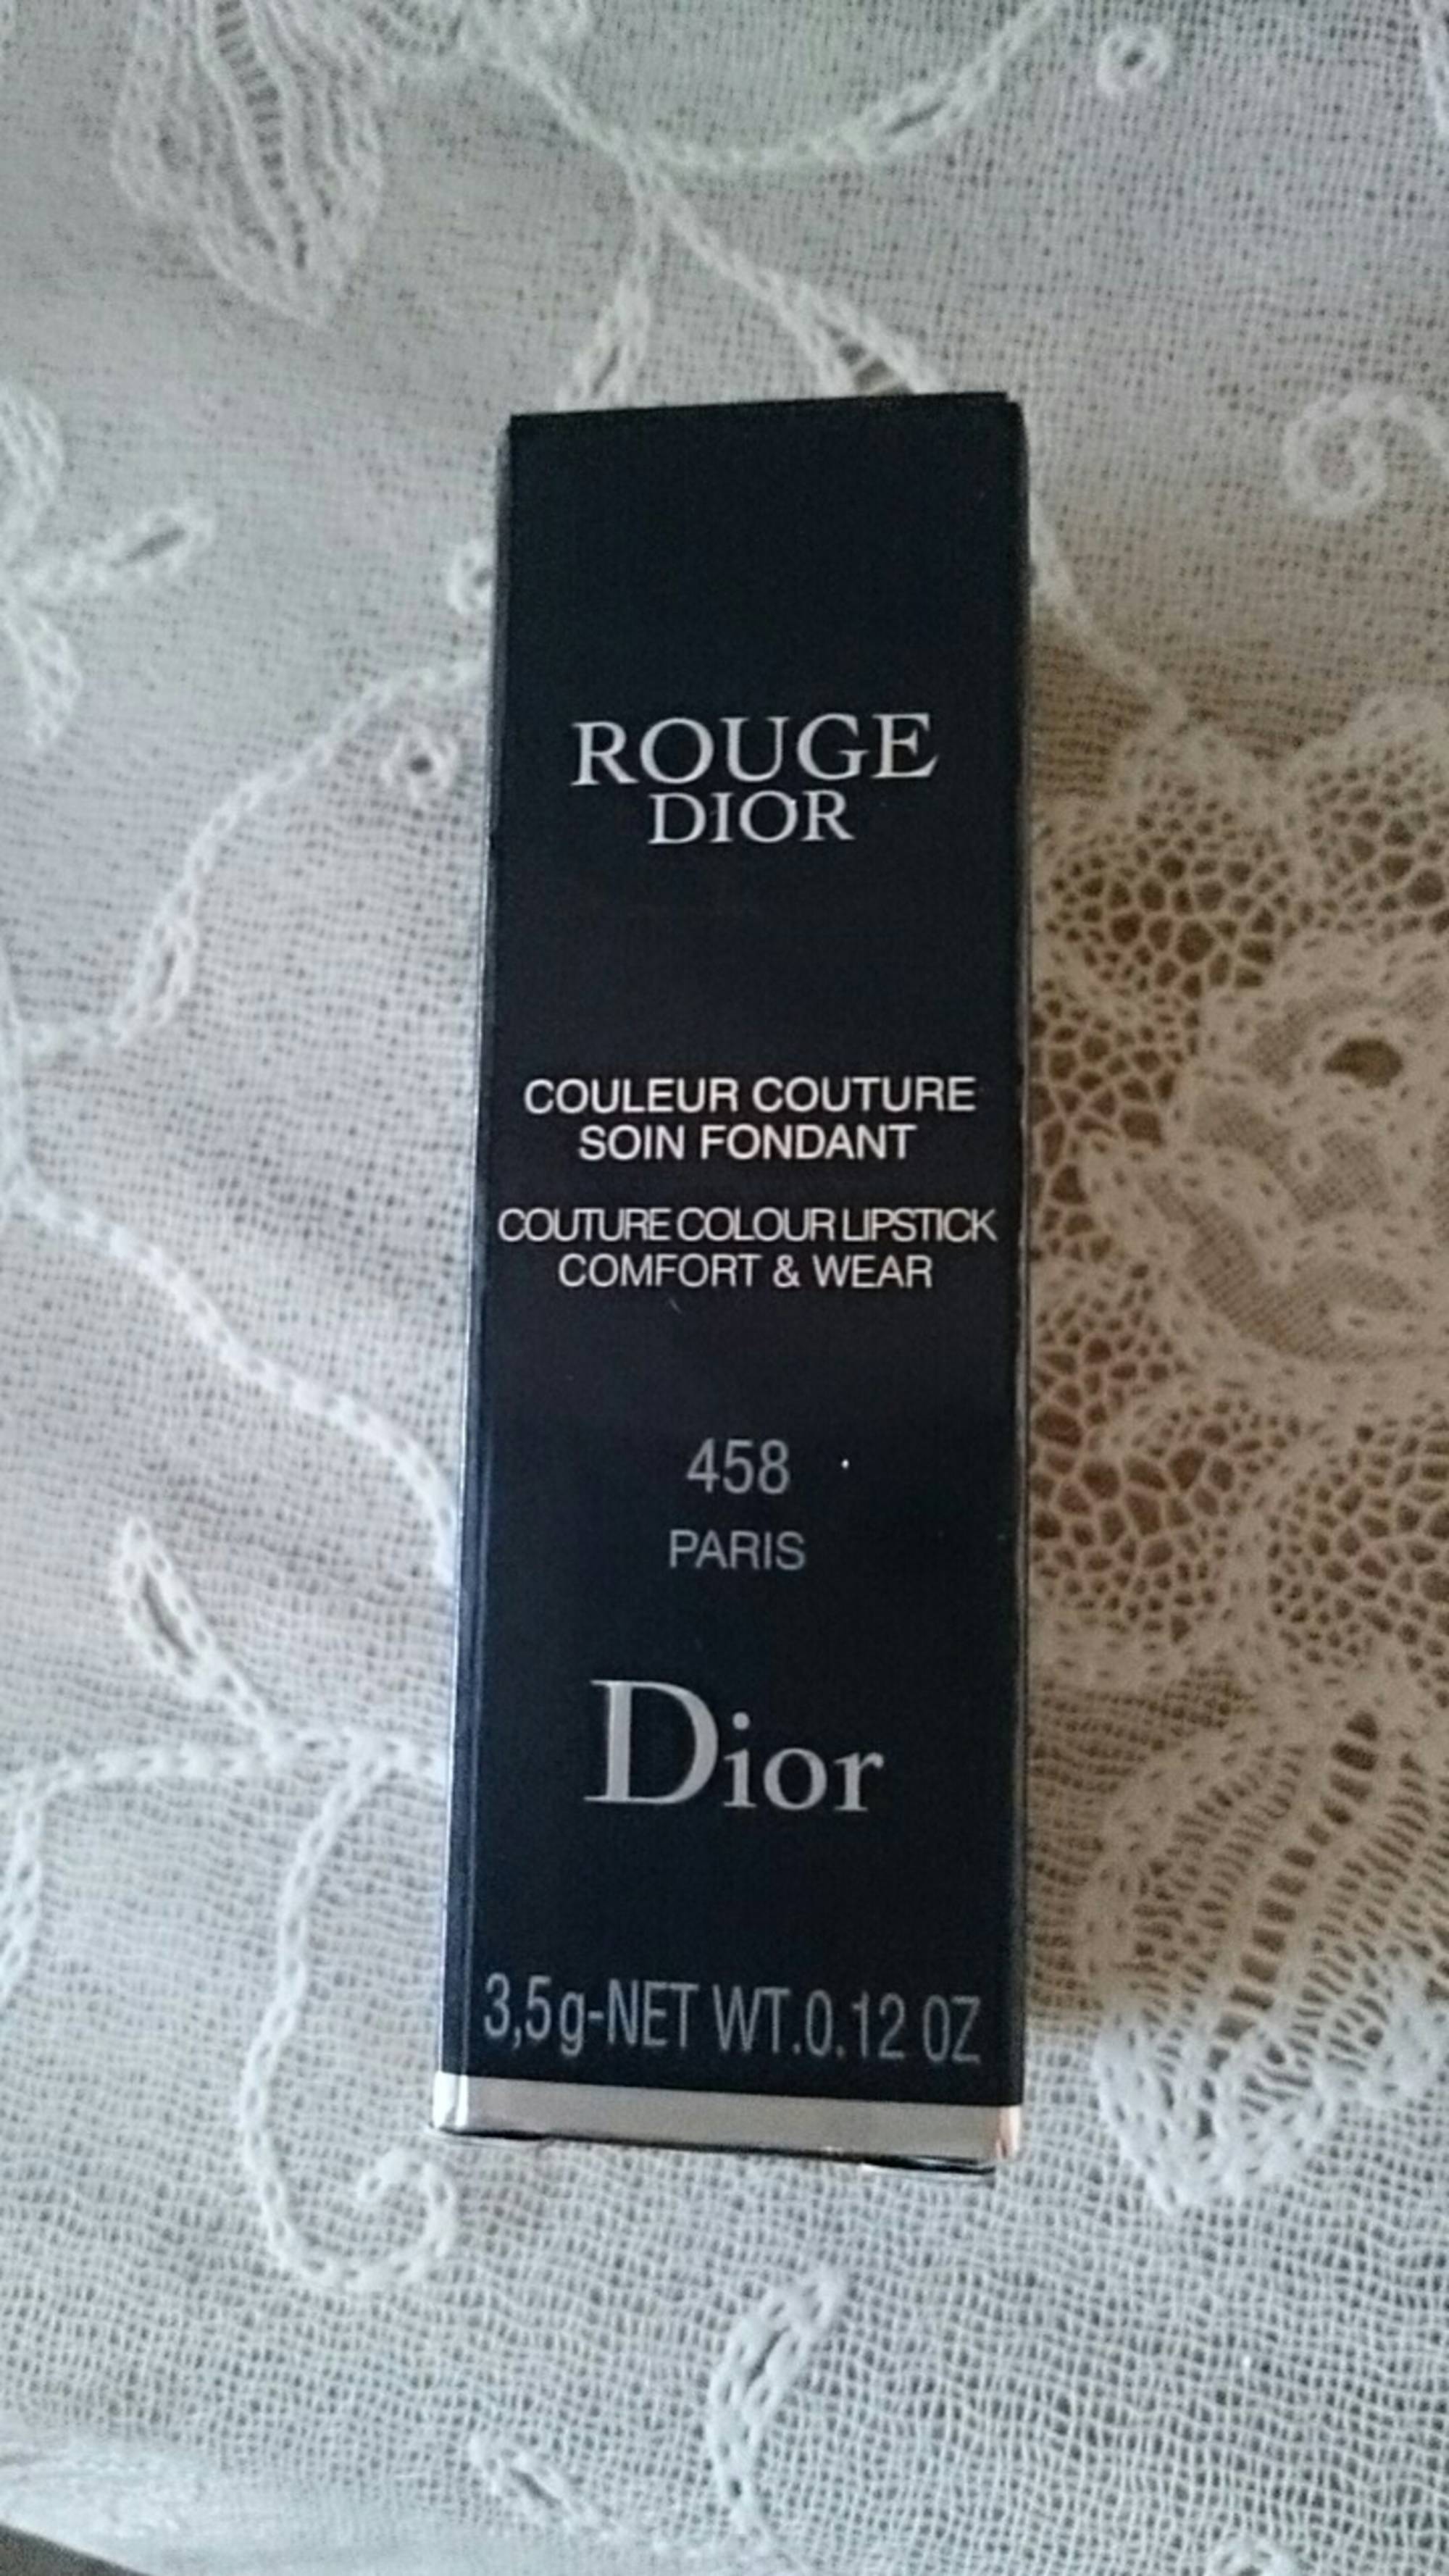 DIOR - Rouge dior - Couleur couture soin fondant 458